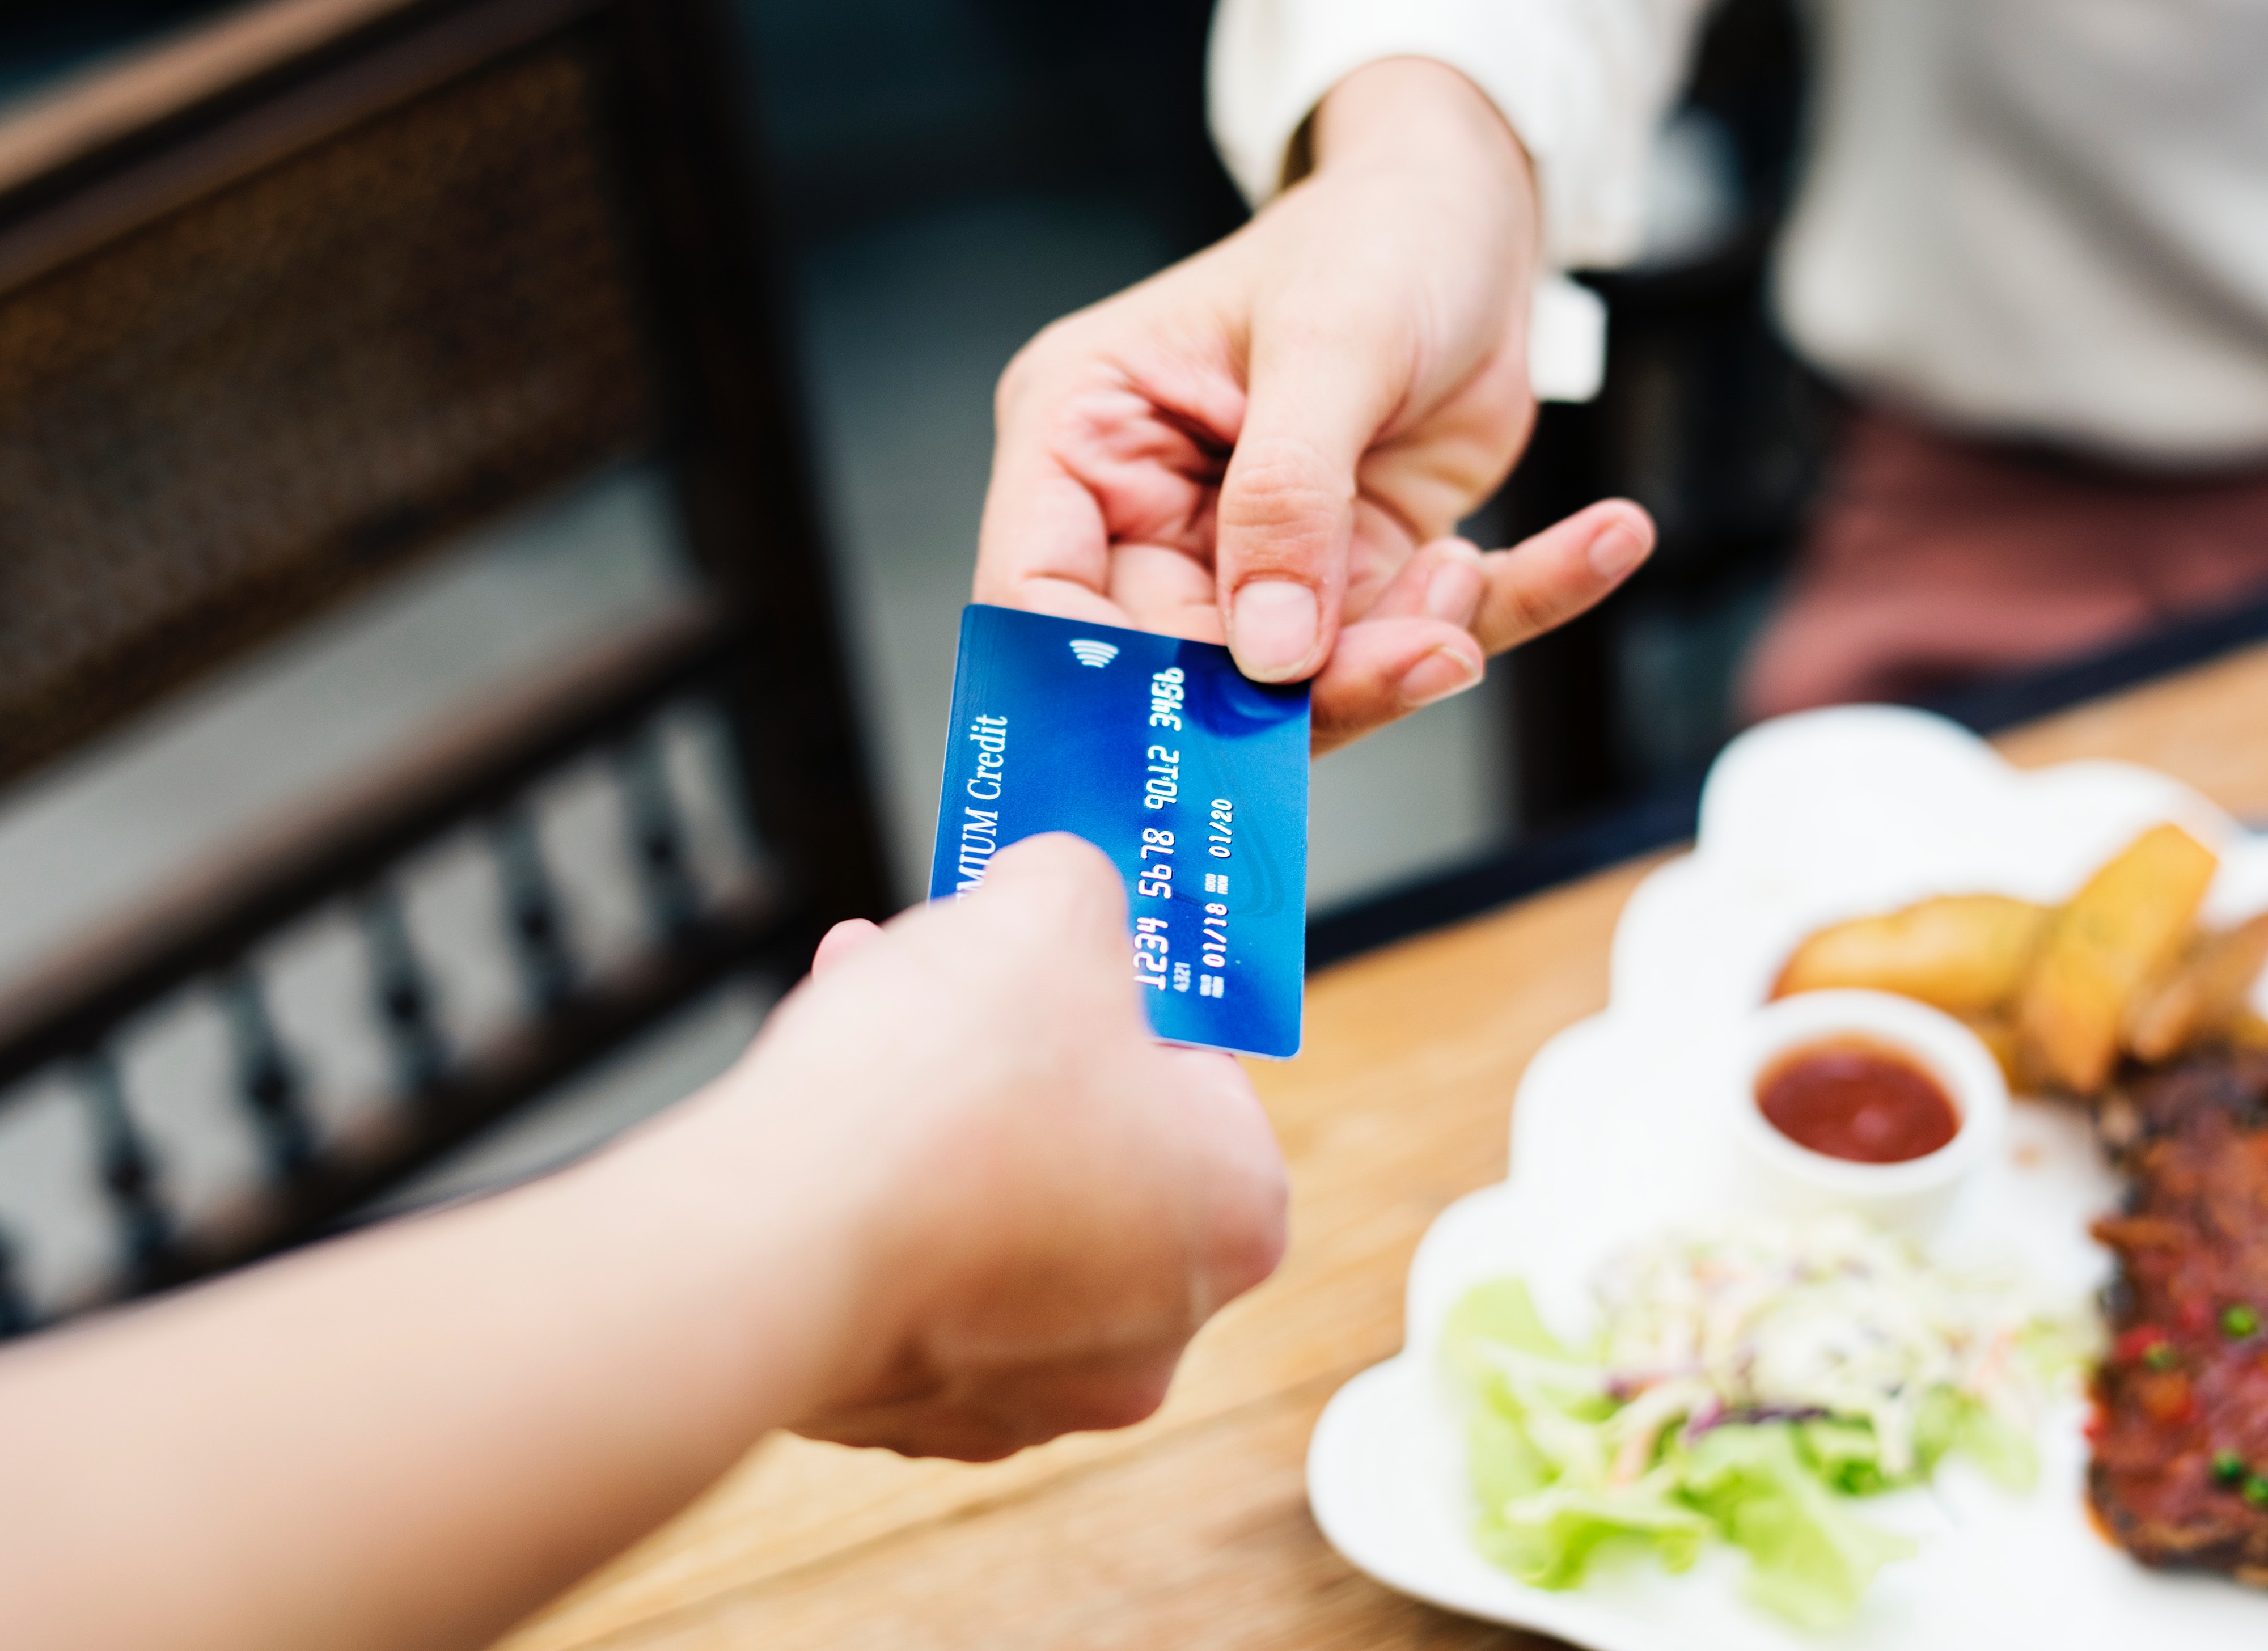 5 Ways Your Food Business Could Benefit from Going Cashless